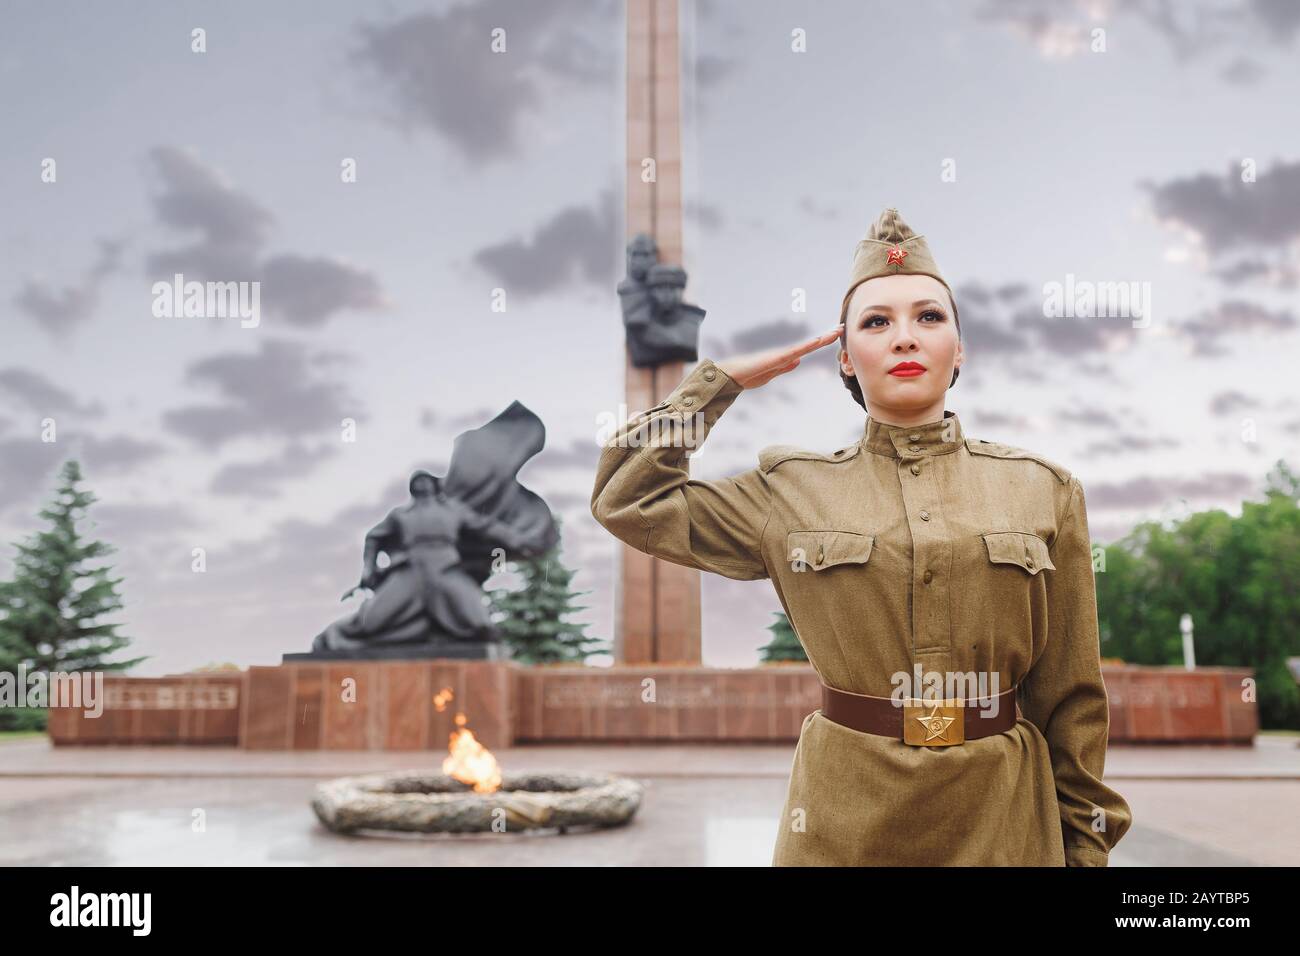 A girl in an old Soviet military uniform salute near the eternal flame. The celebration and commemoration of the Second World War on May 9 Stock Photo